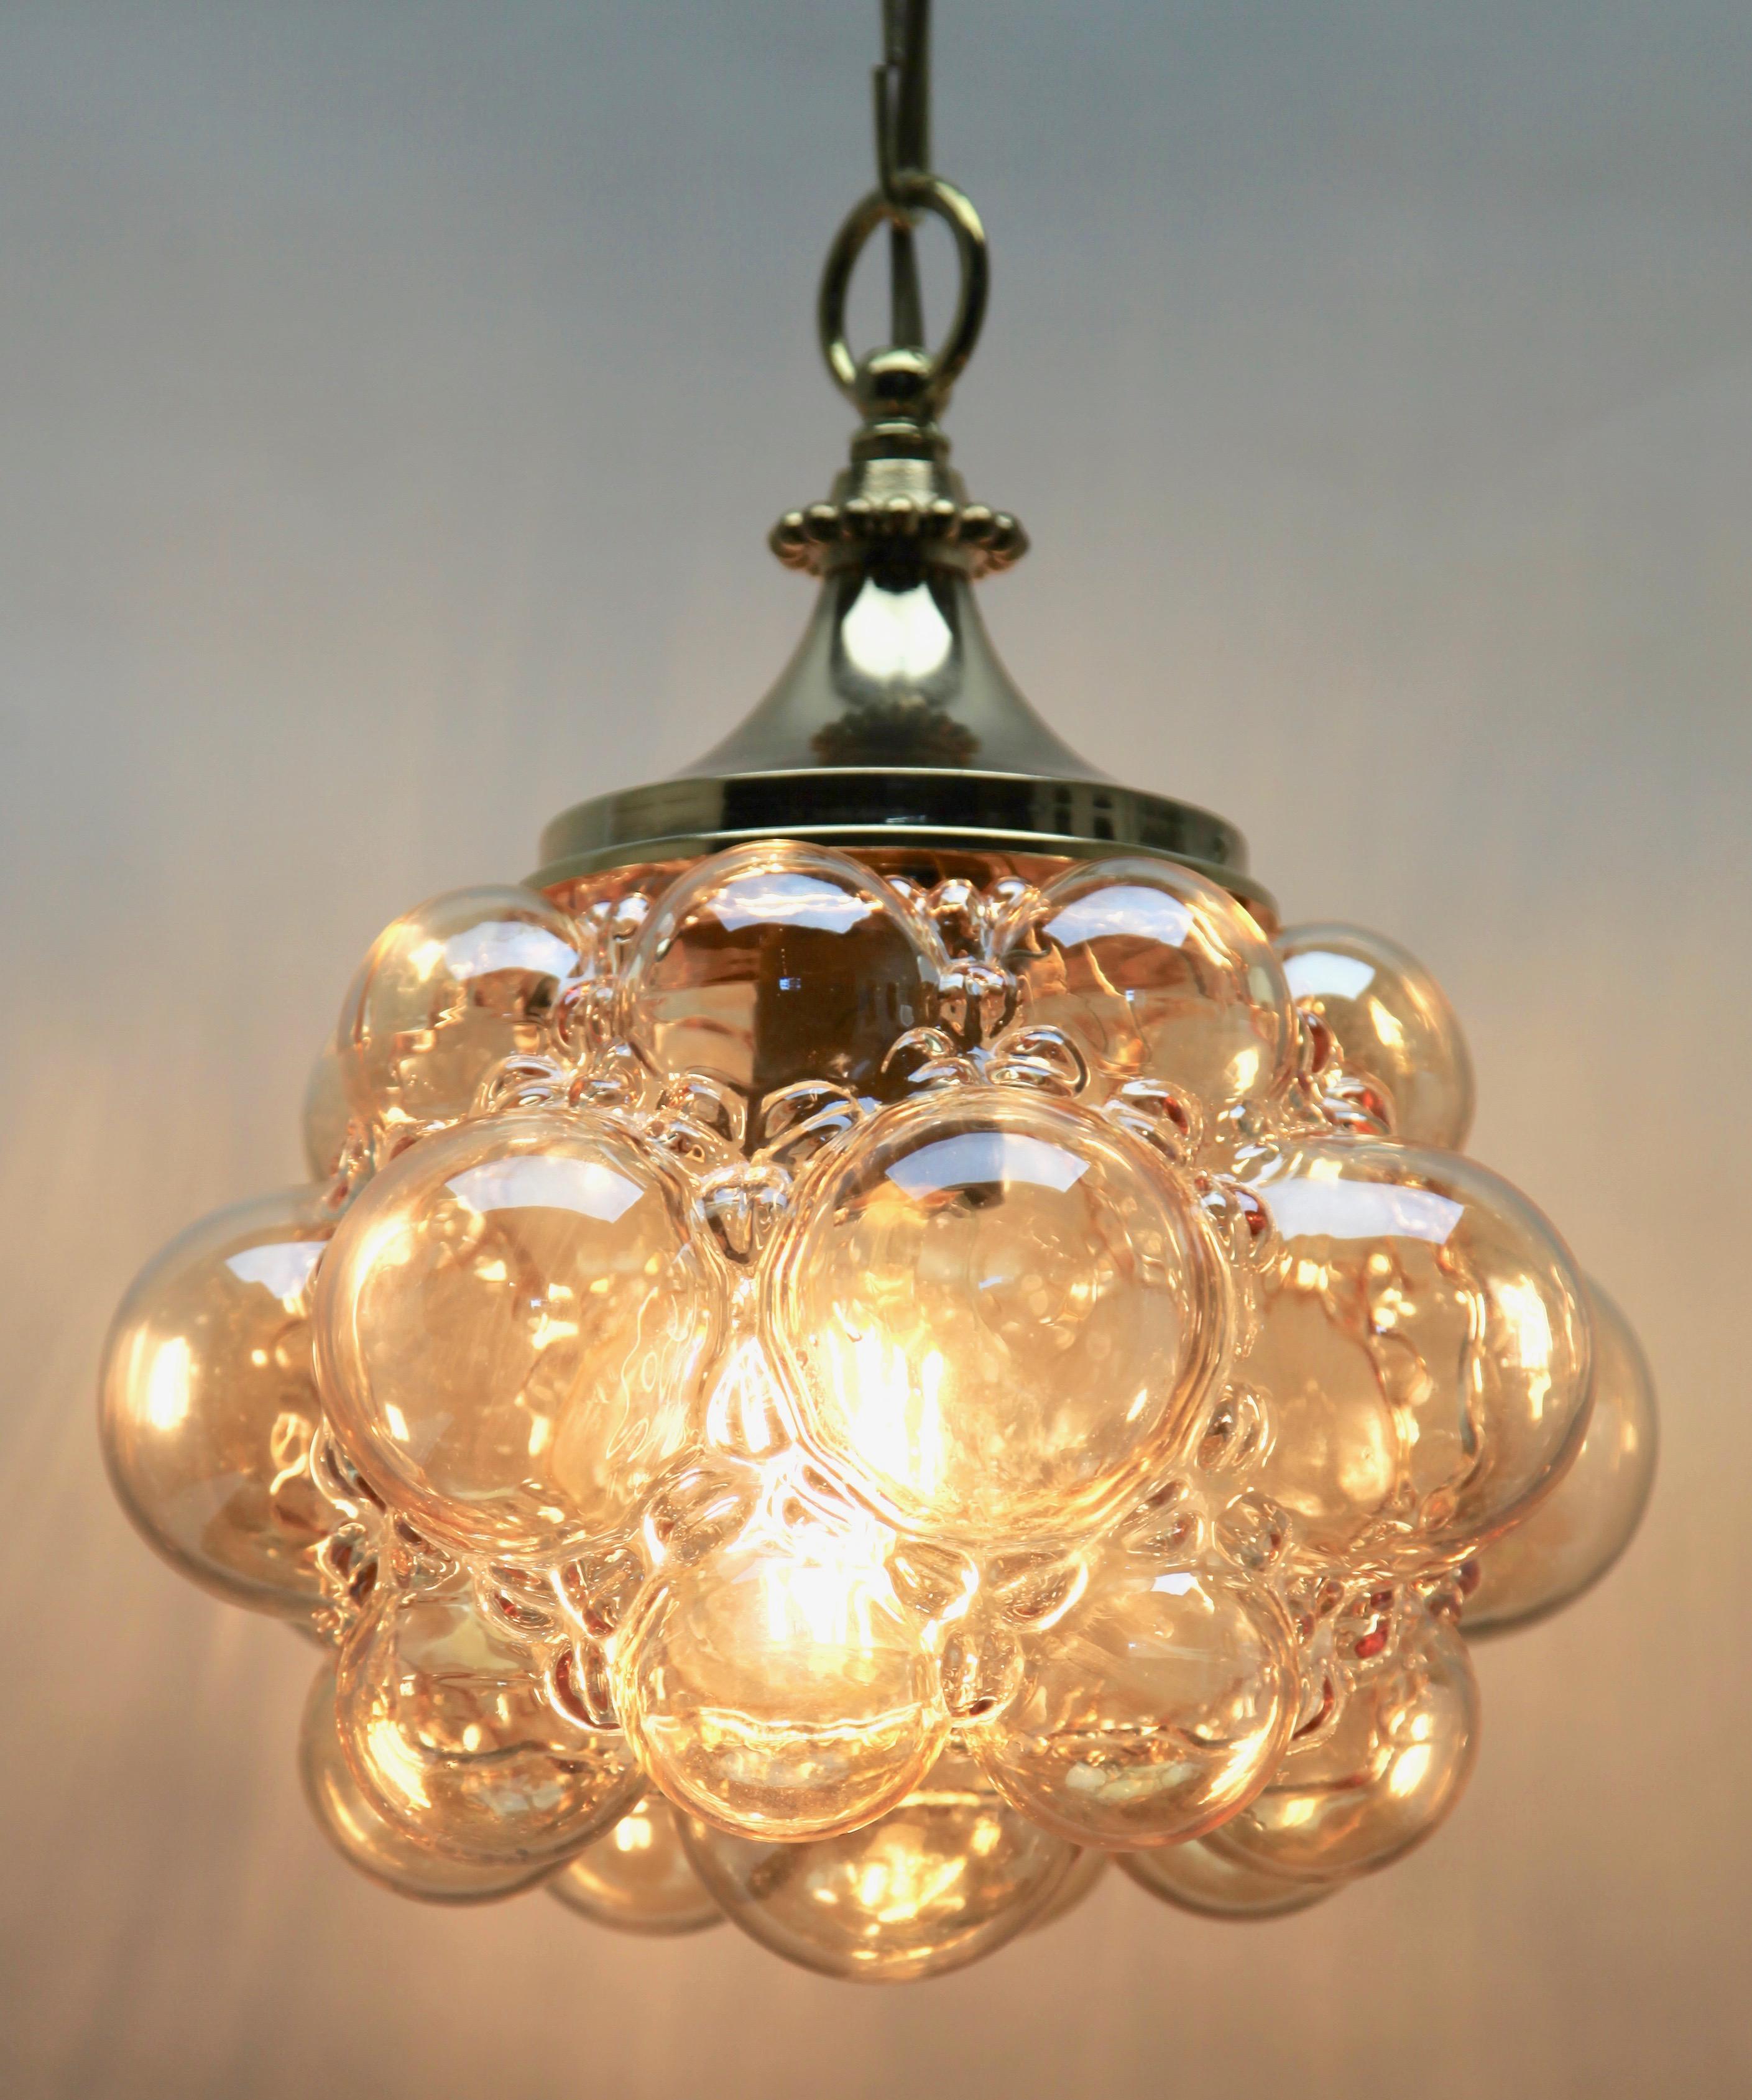 Bubble pendant by Glashütte Limburg during Helena Tyrell Era, 1960s

In excellent condition and in full working order having recently been re-wired
With original patina on brass parts.
Lamp total height 22.83 inch
Size: Glass shade height 9.44